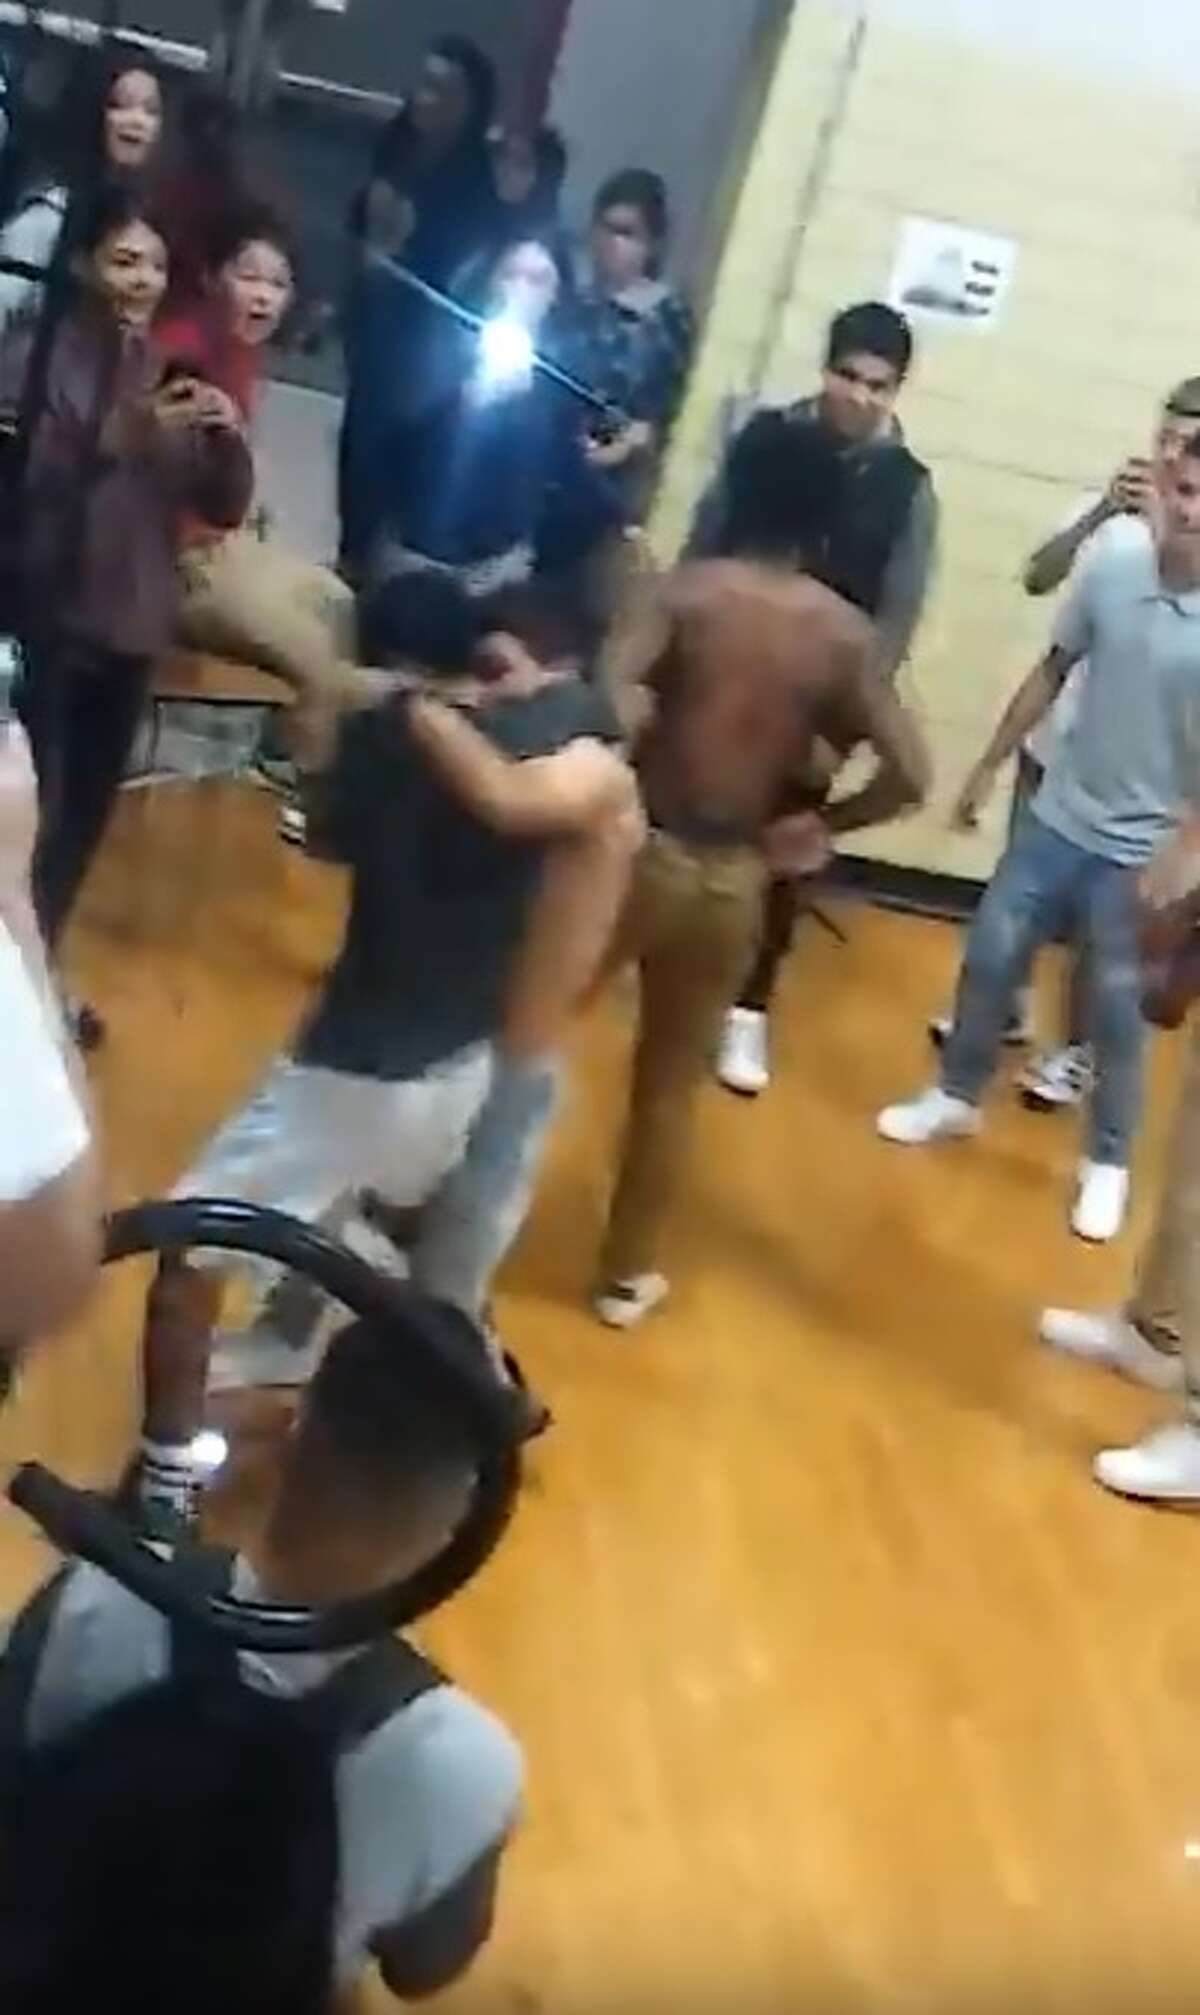 Video Massive high school fight ends in 4 arrests, changes to SAISD policy